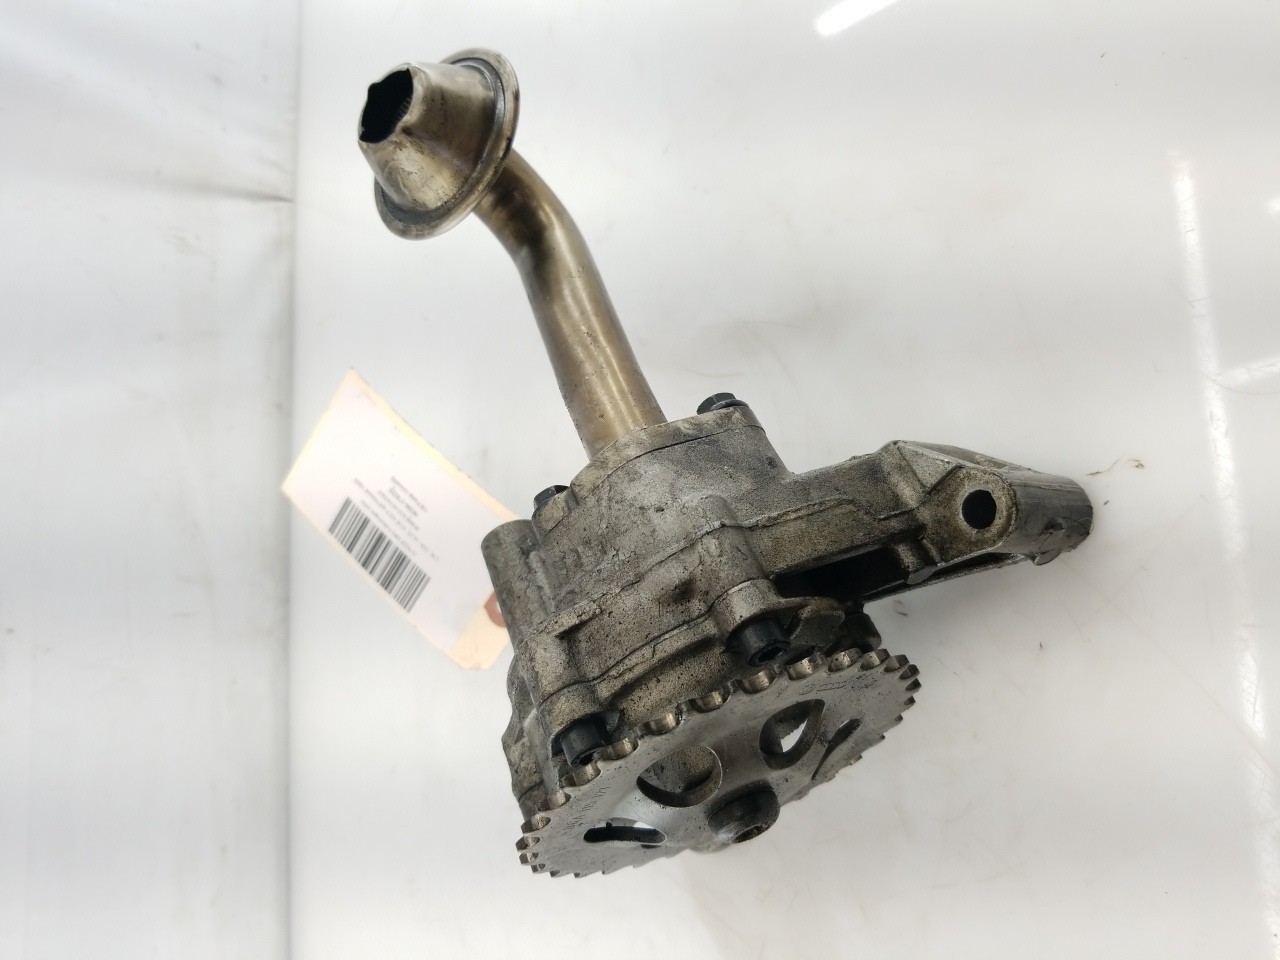 Oil Pump Assembly